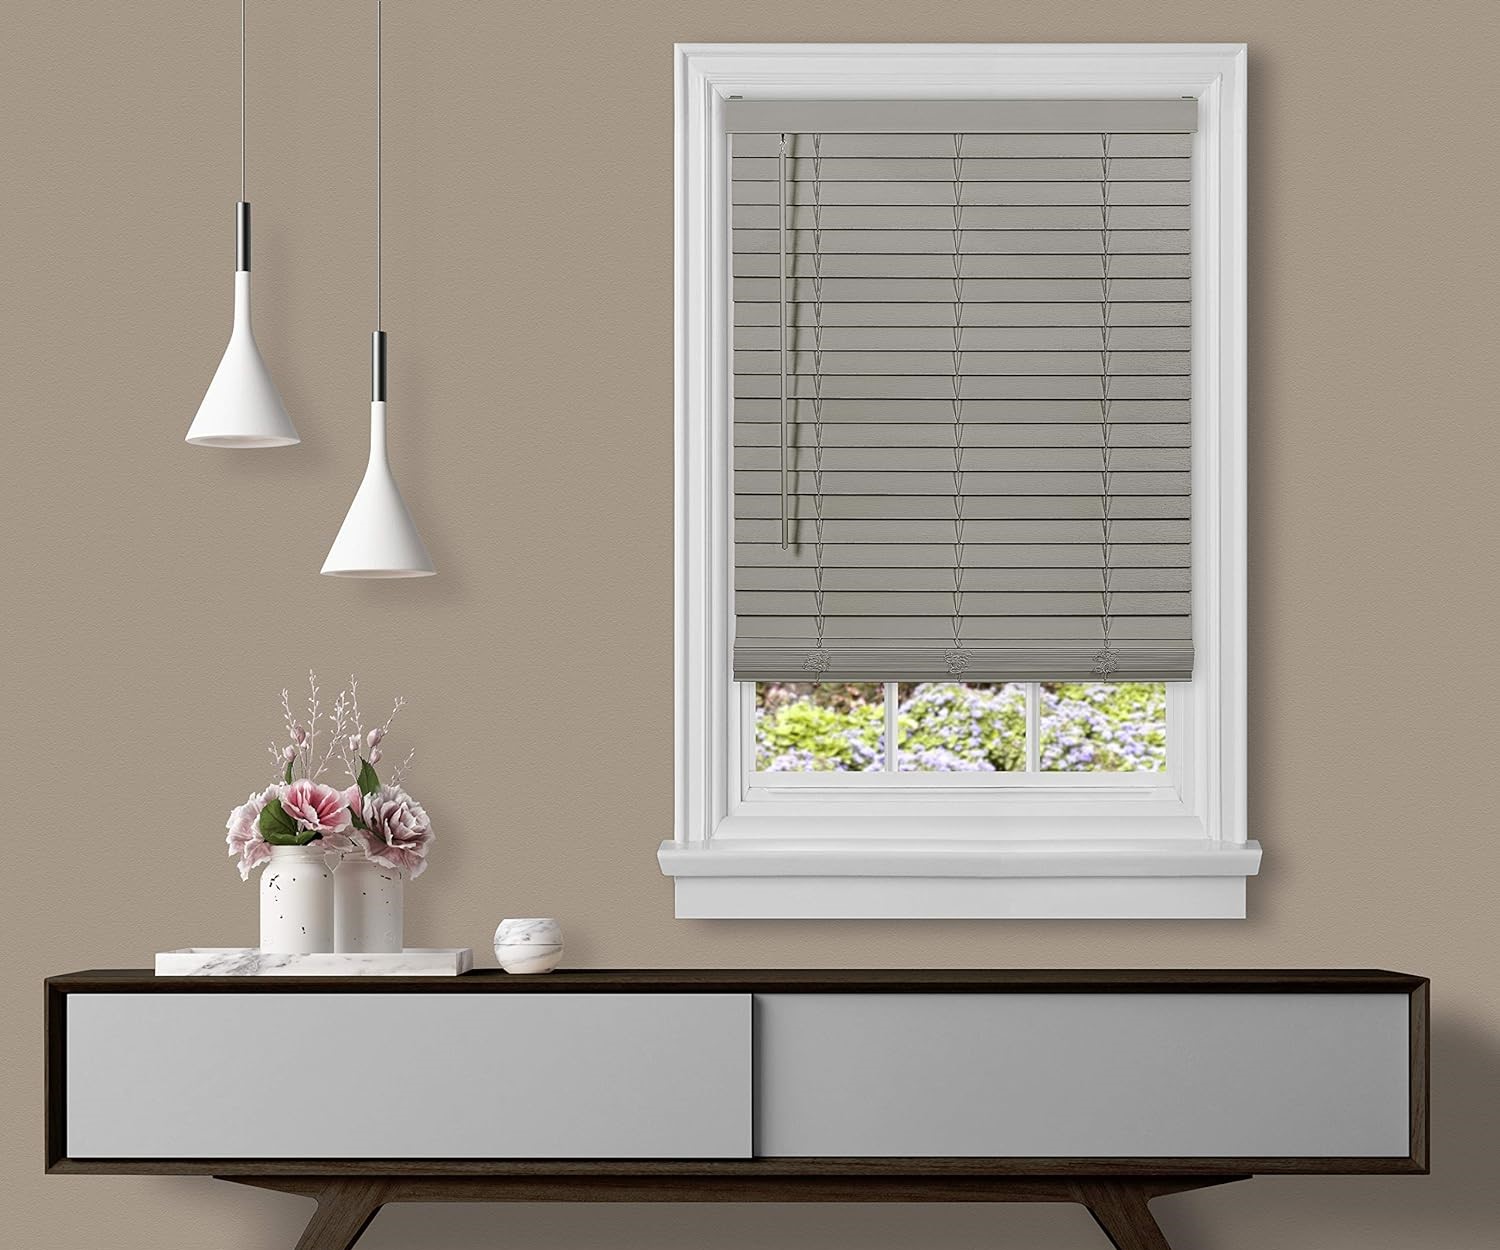 What Size Of Blinds Do I Need For A 35-Inch Window